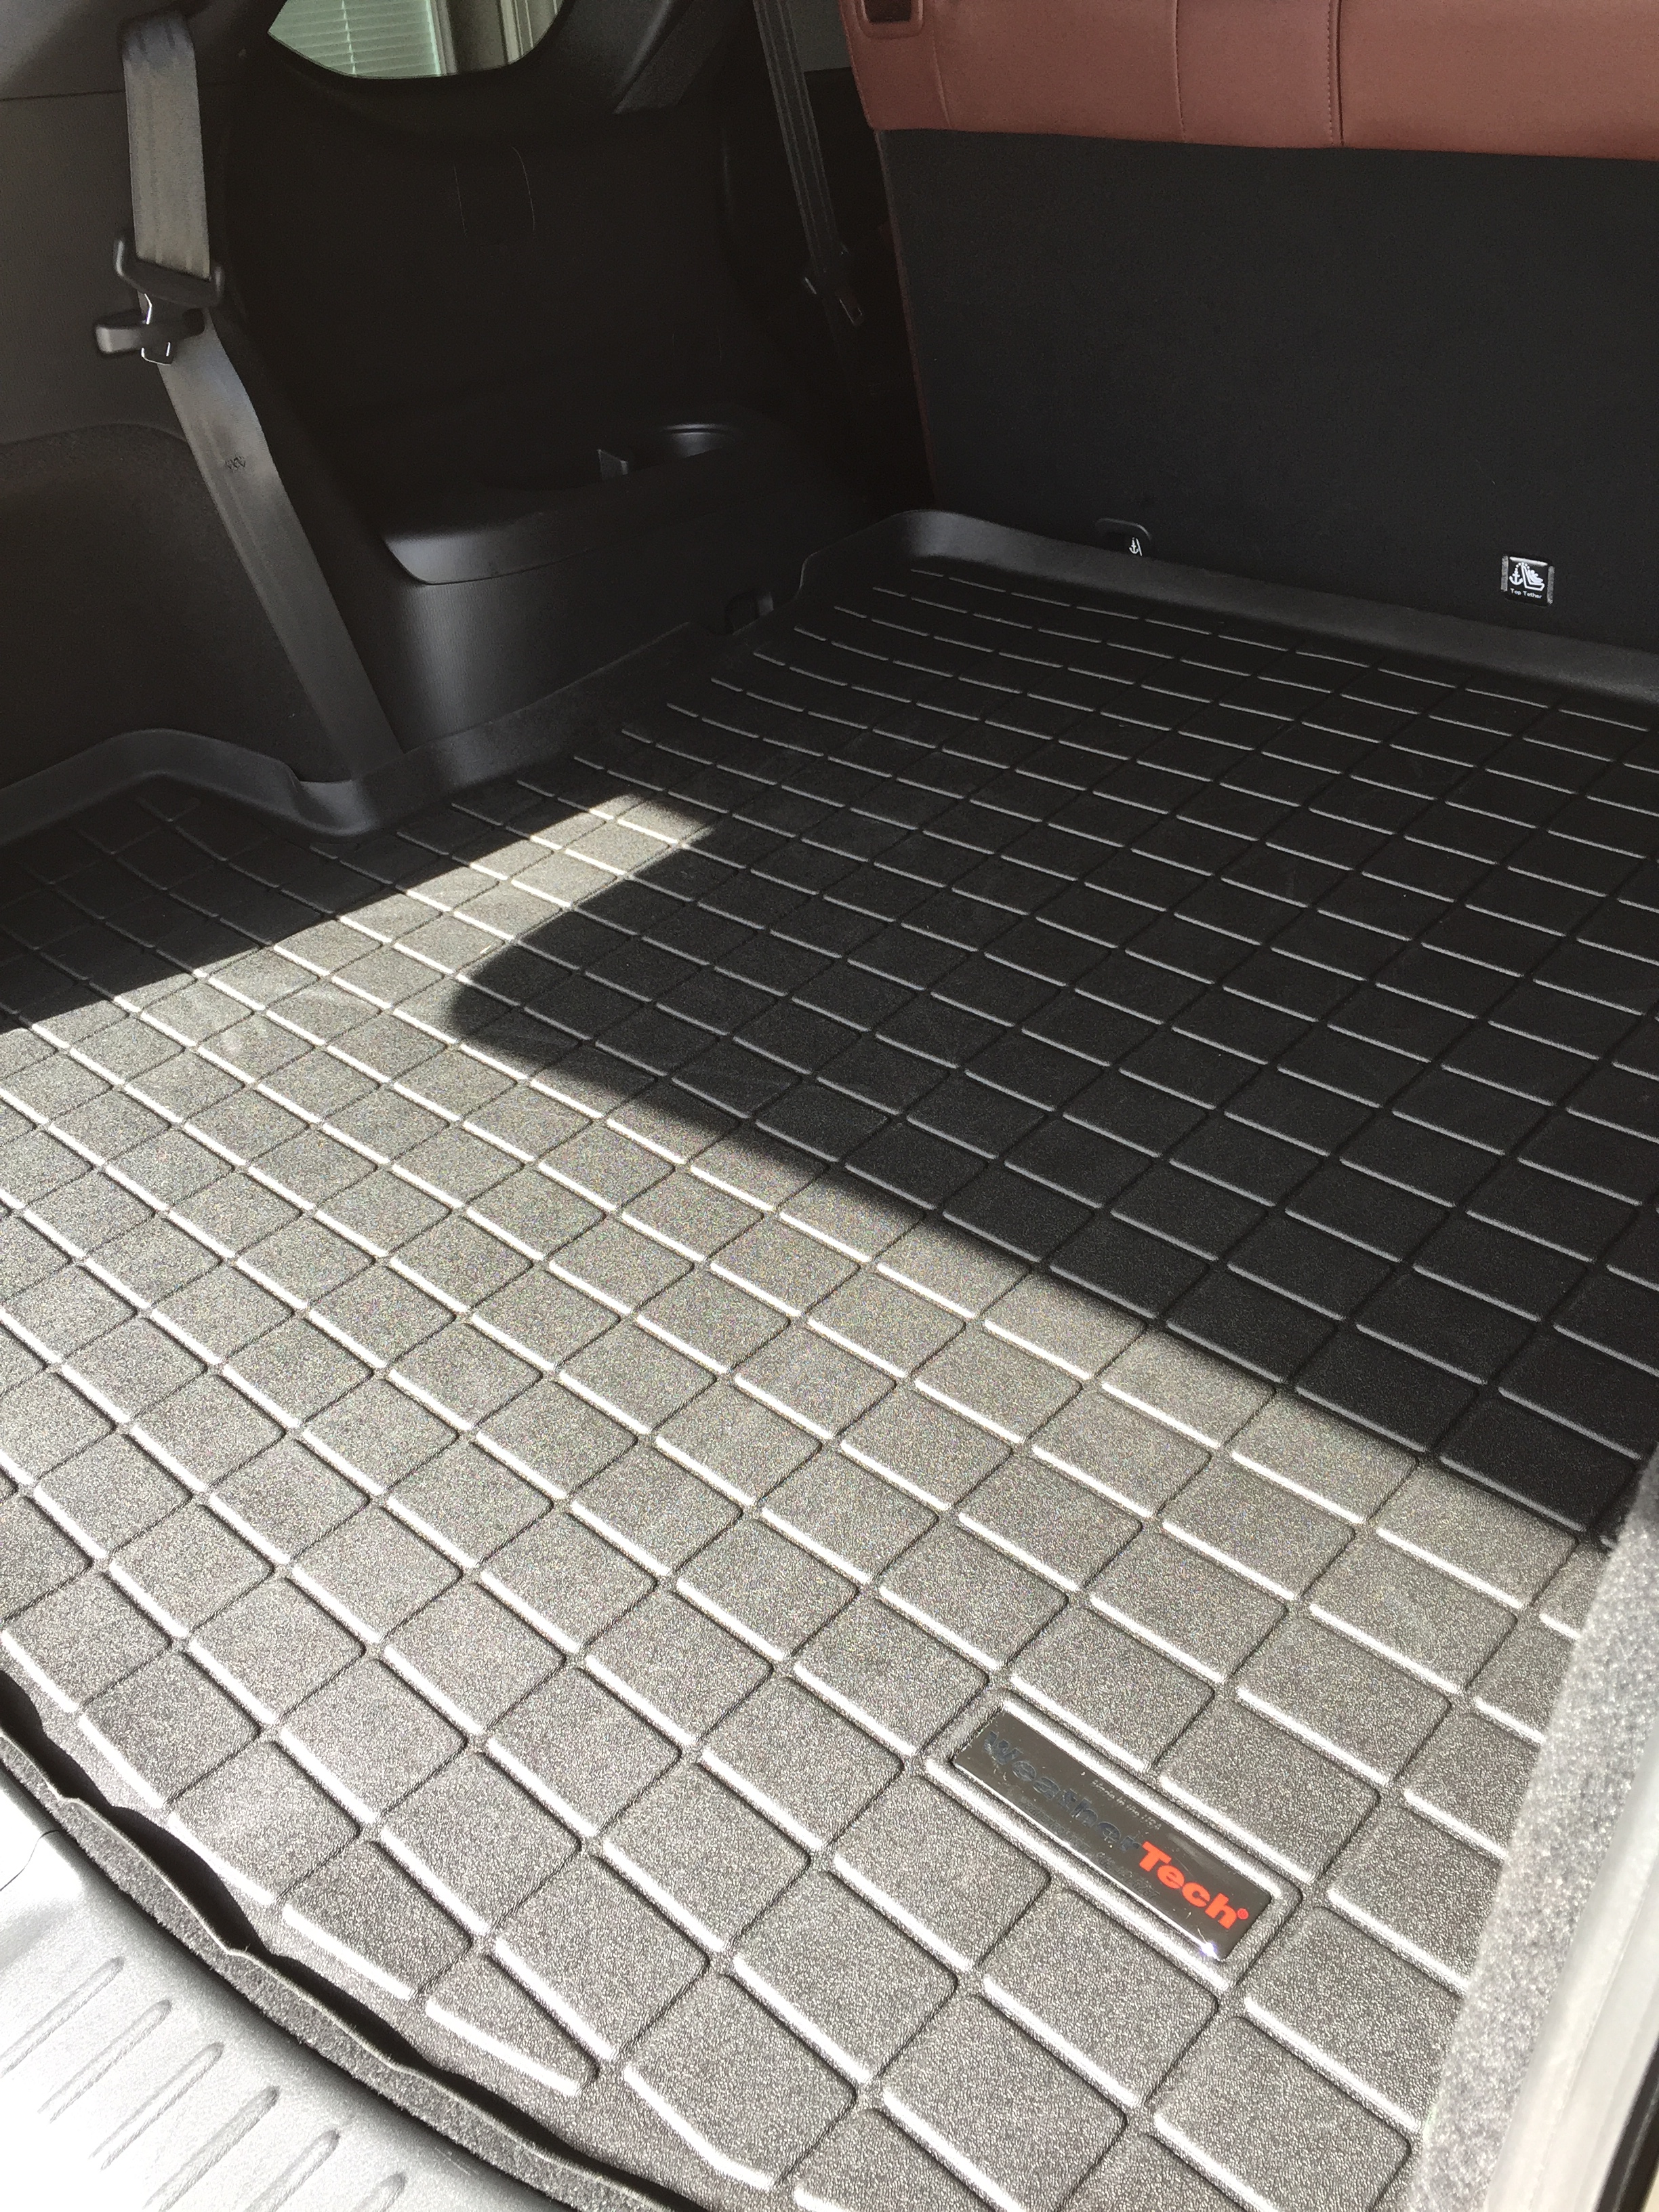 2016 CX-9 All Weather Mats - Mazda Forum - Mazda Enthusiast Forums